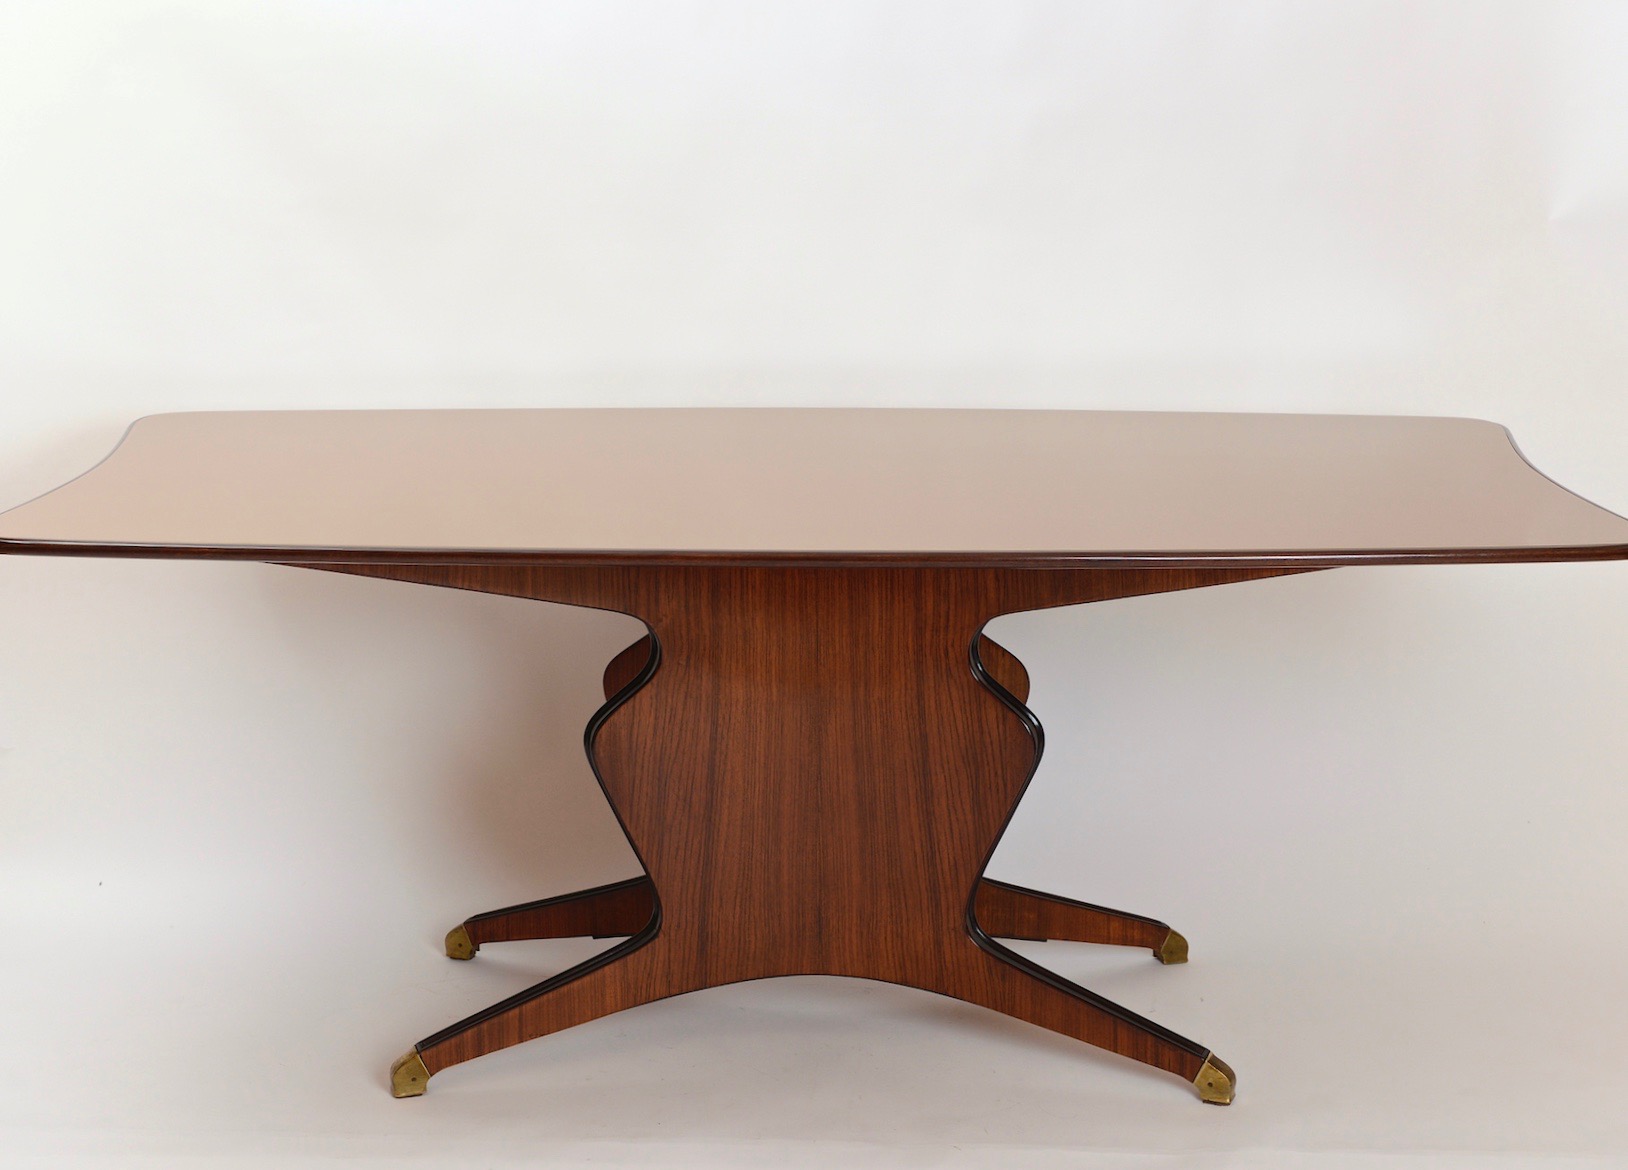 Rosewood Dining Table with Glass Insert and Brass Feet